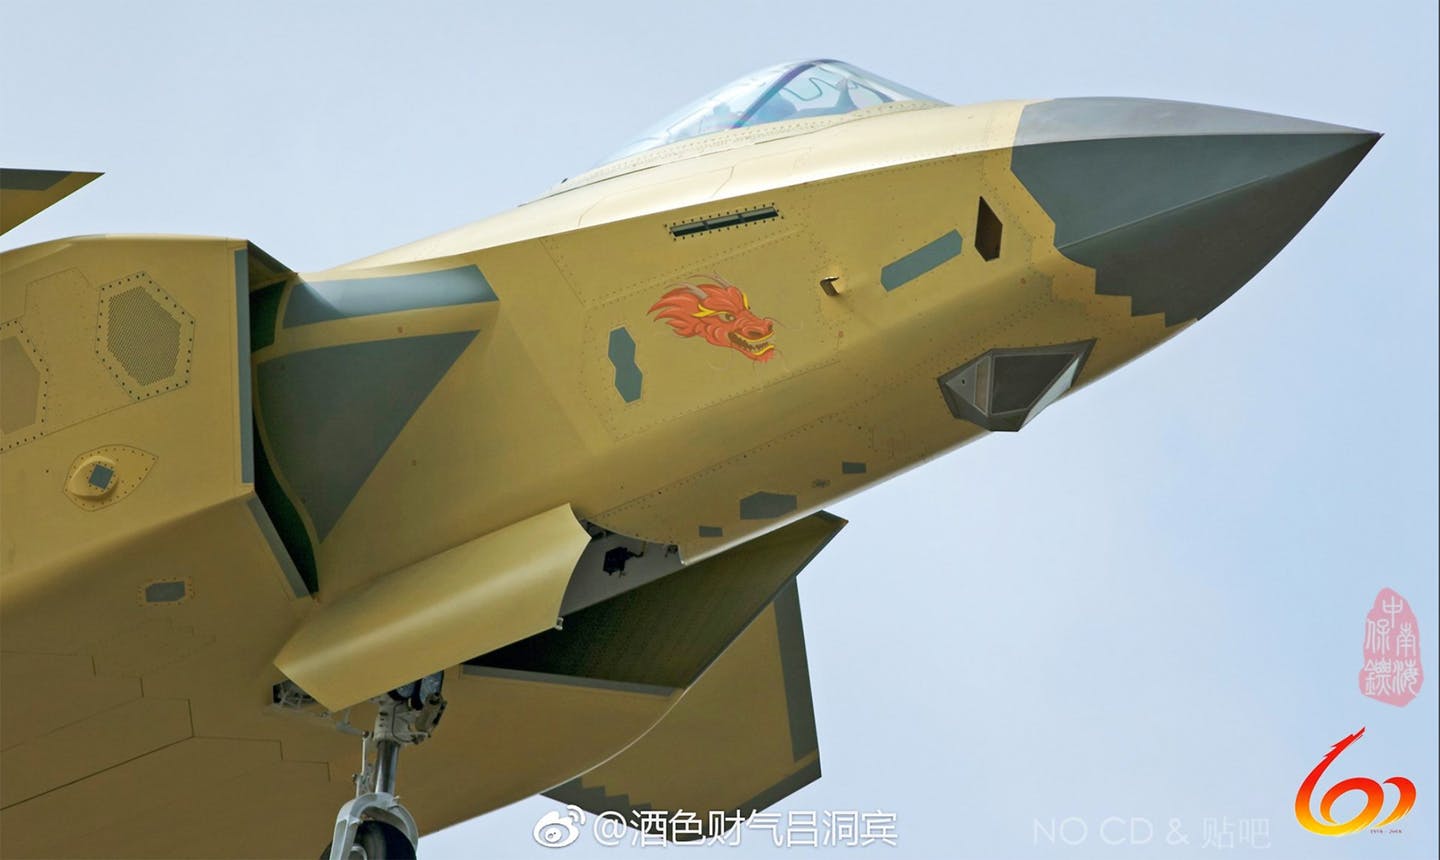 High Quality Shots Of Unpainted Chinese J Stealth Fighter Offer